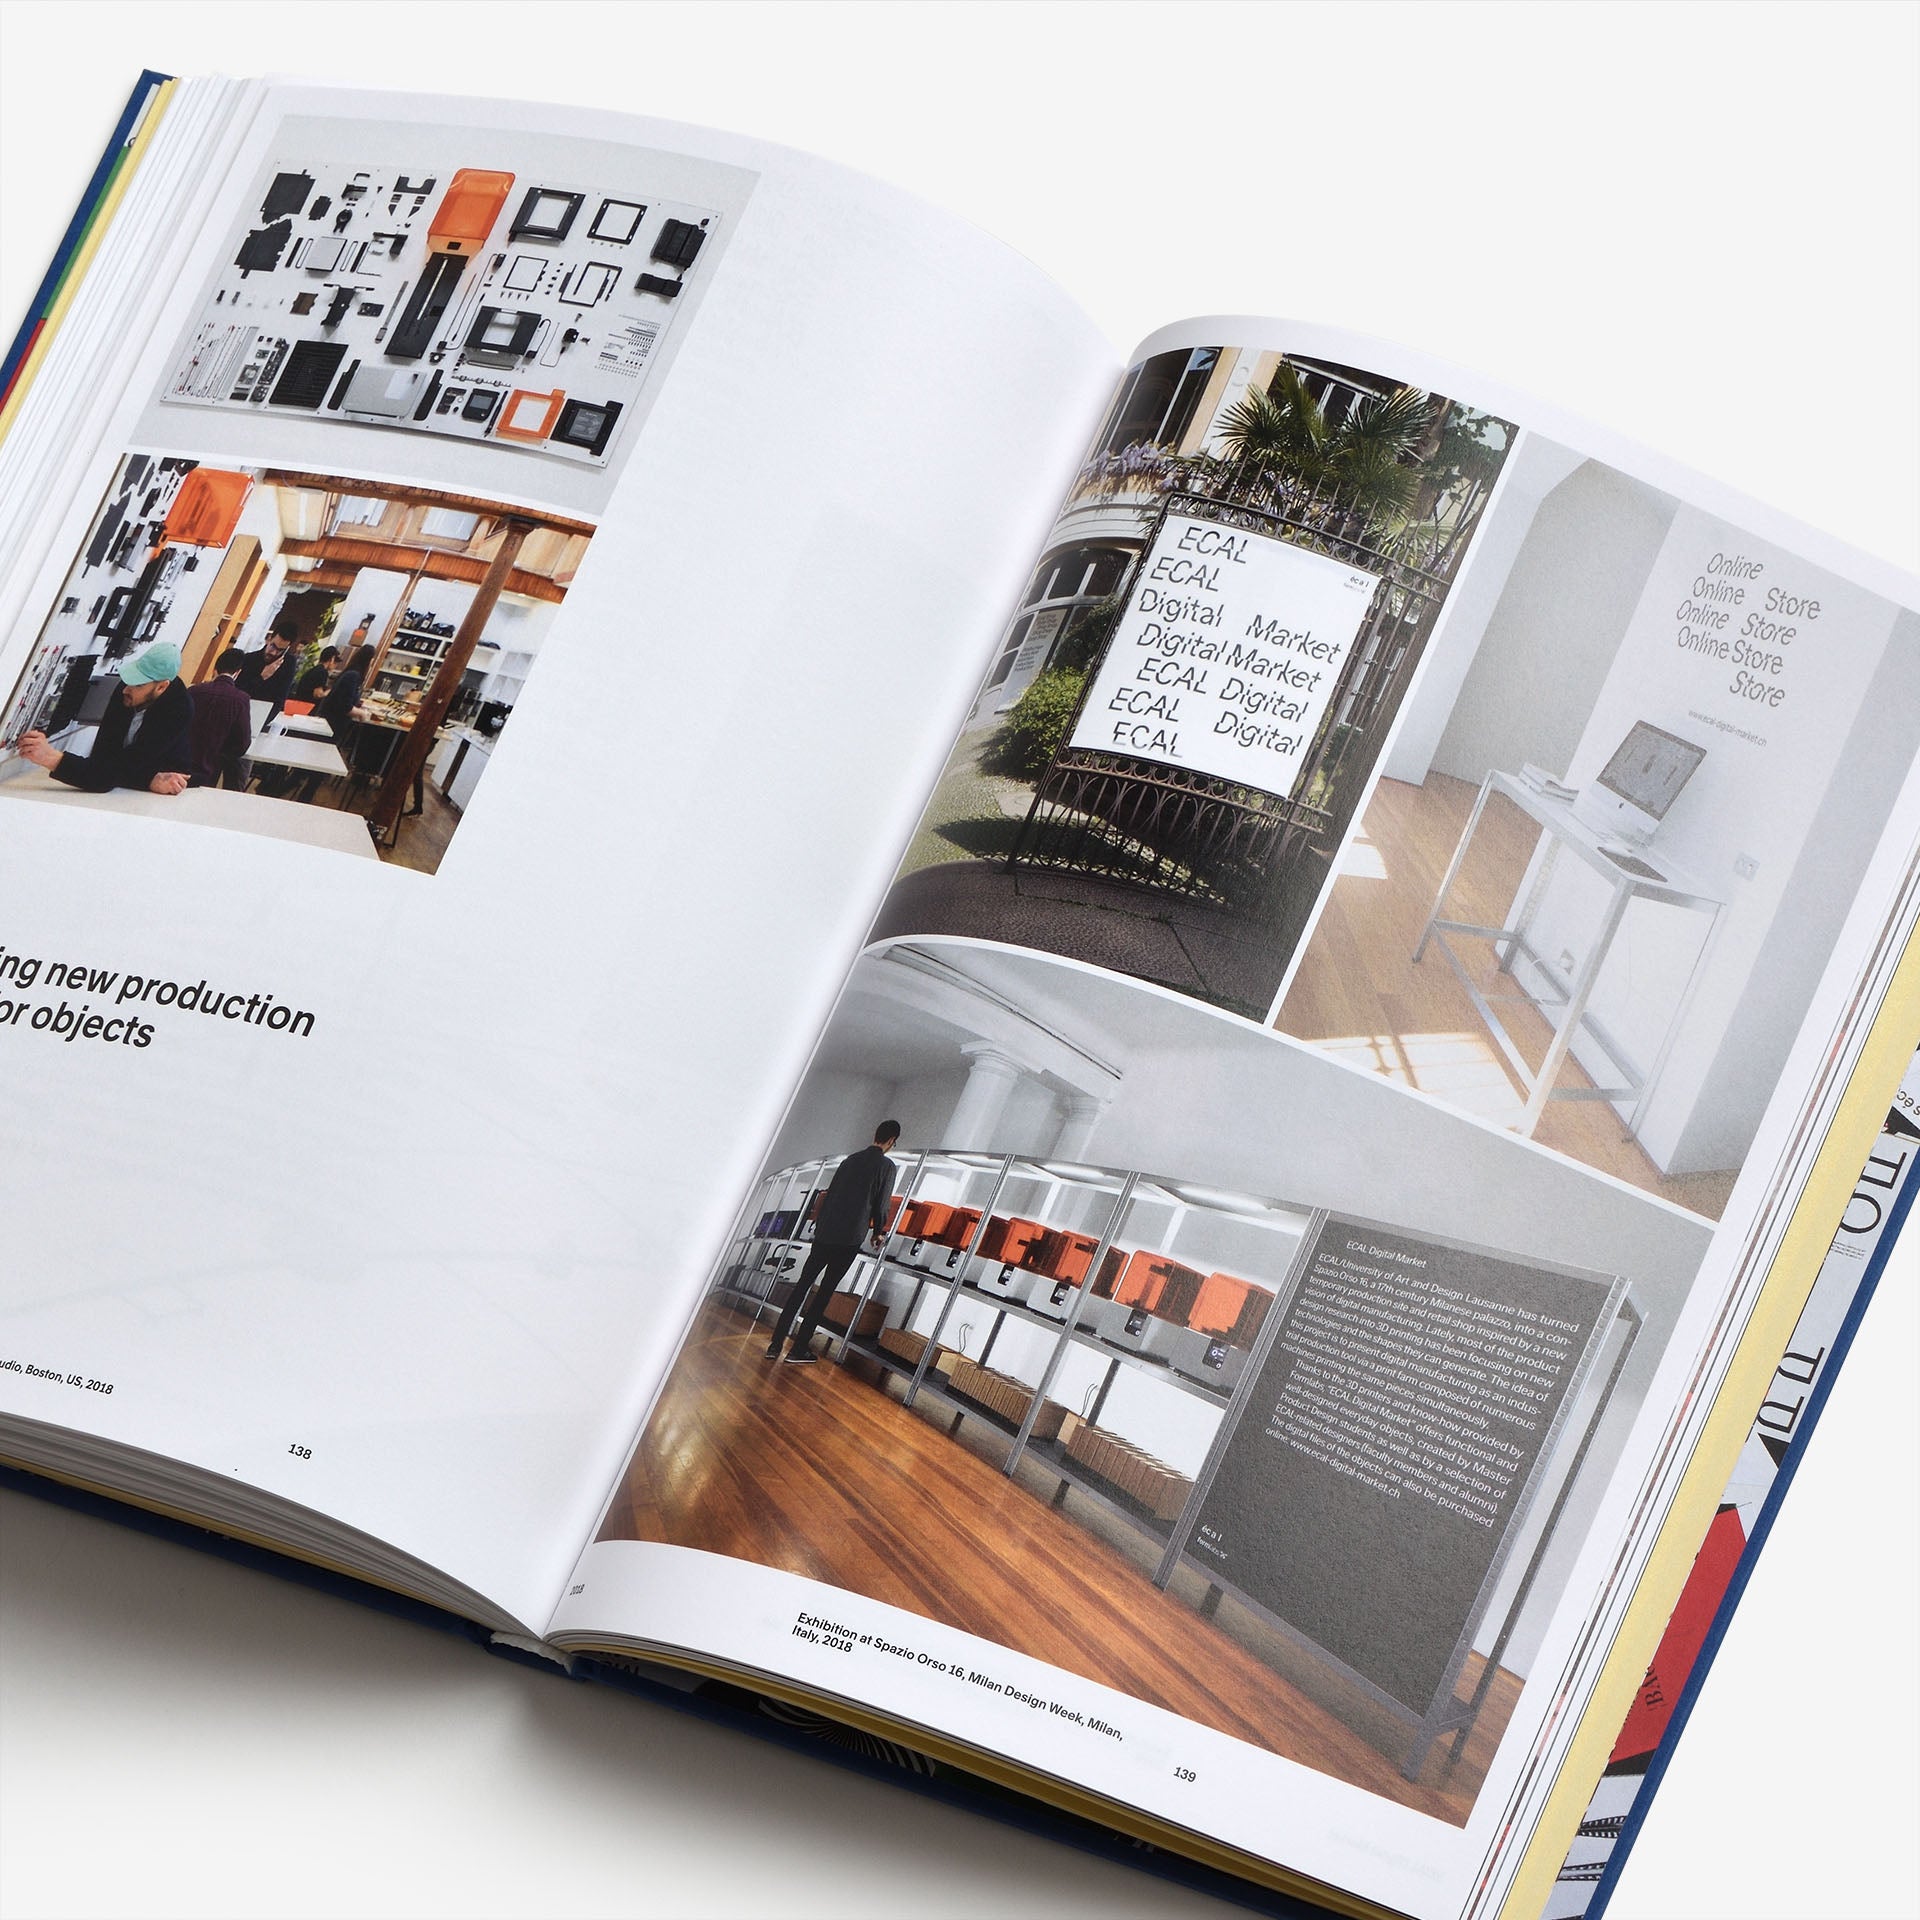 The ECAL Manual of Style: How to best teach design today?